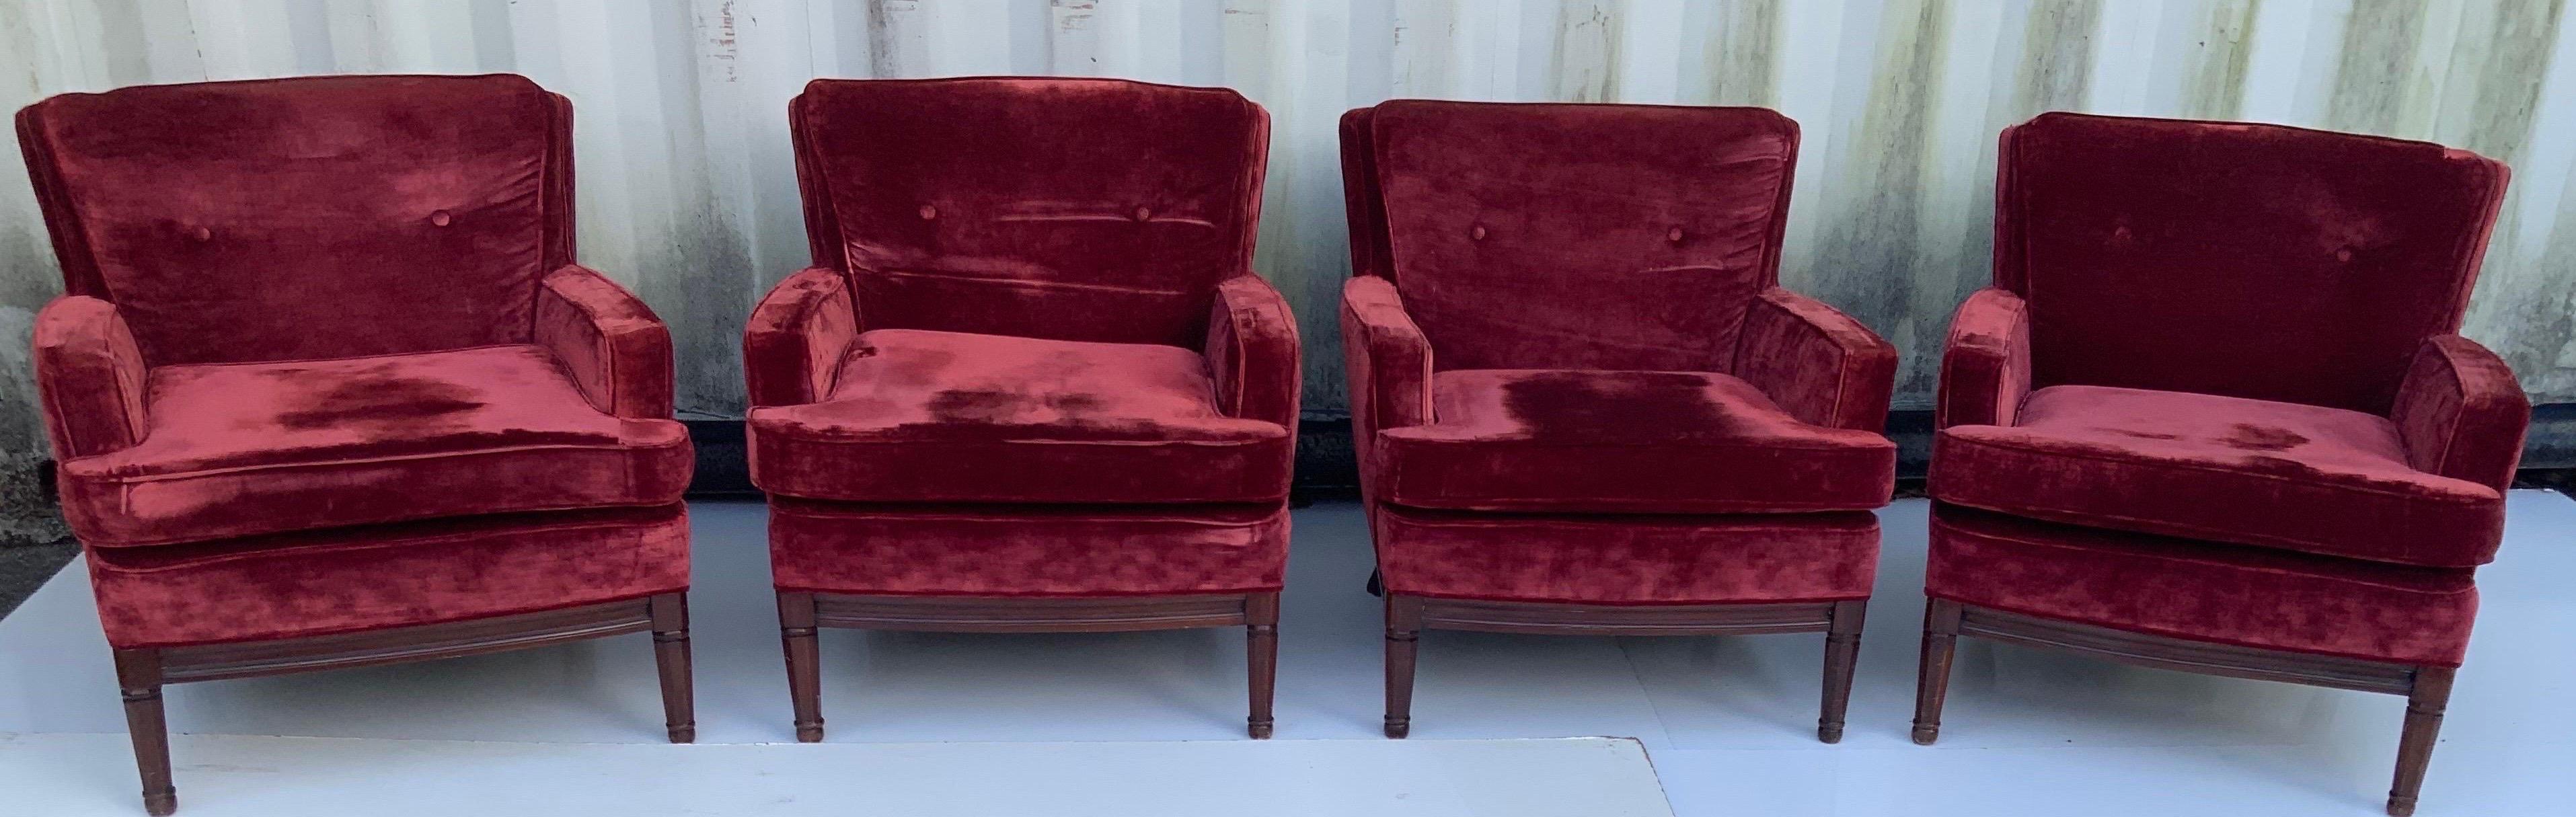 Pair of Neoclassical Maison Jansen Lounge Chairs circa 1960, 2 Pairs Available For Sale 5